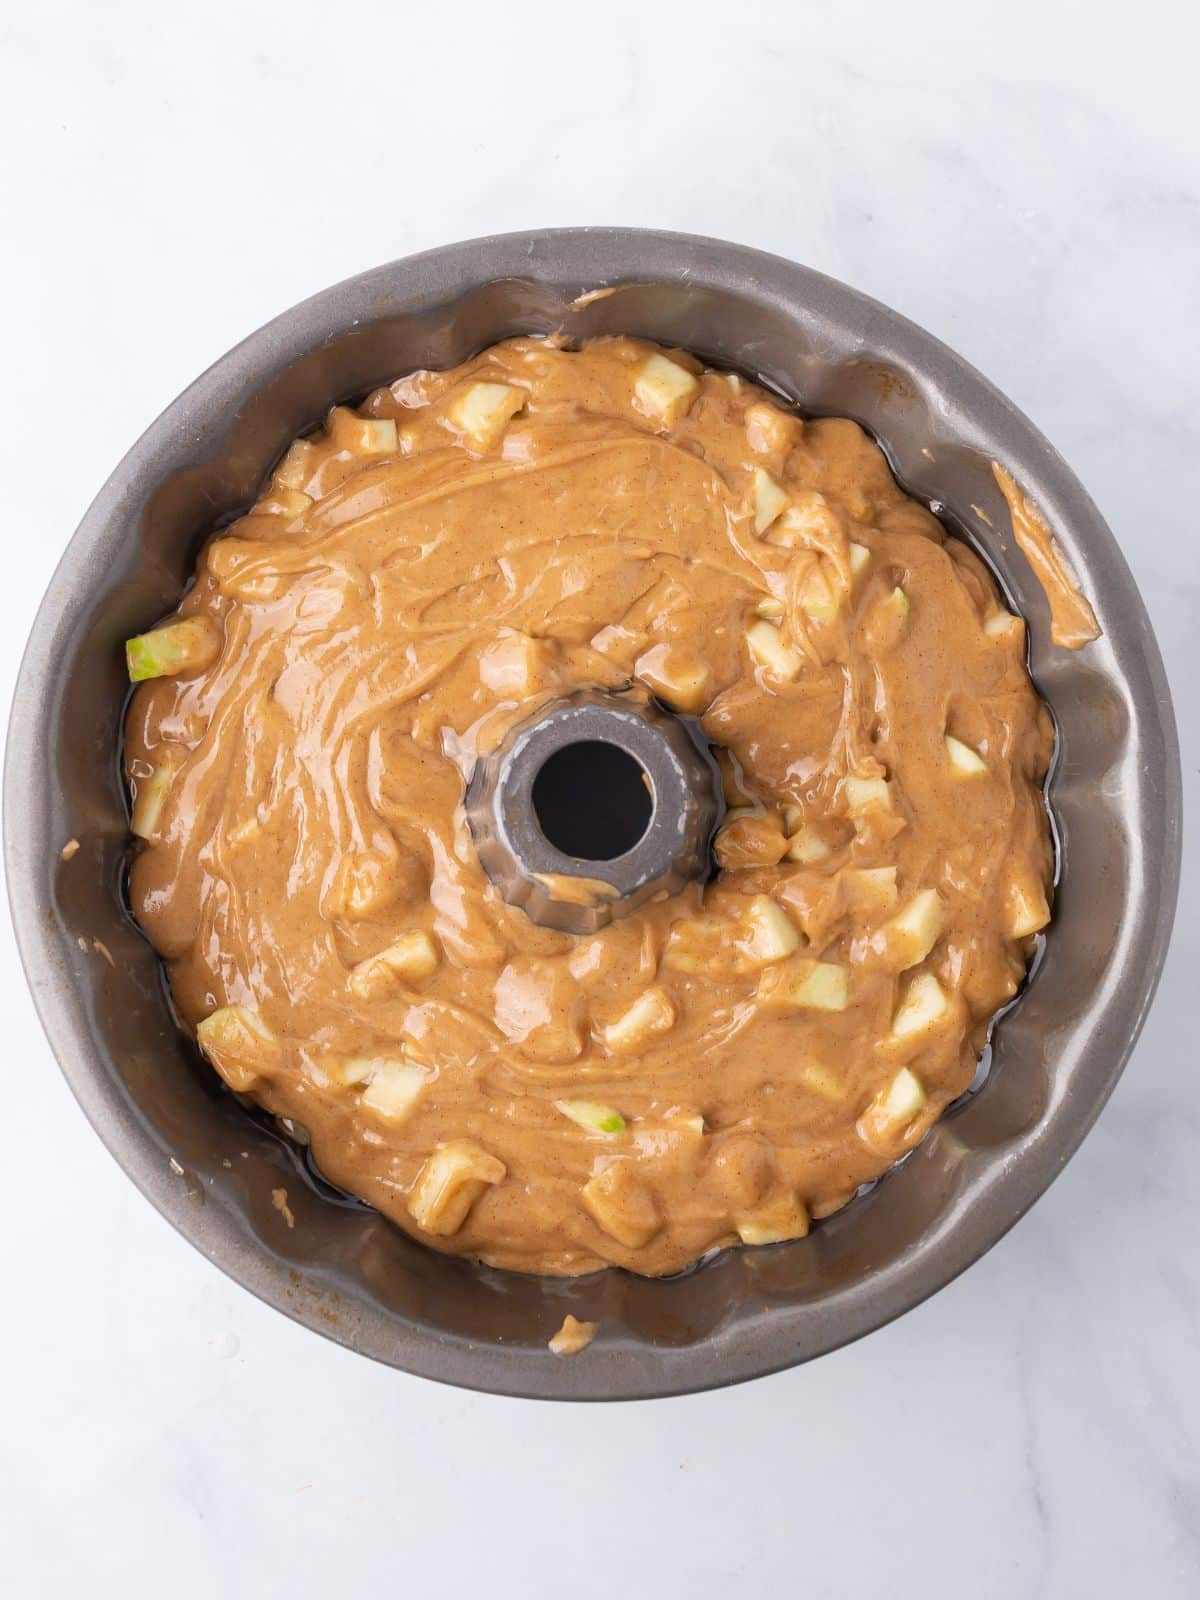 Apple cake in a bundt pan ready to be baked.